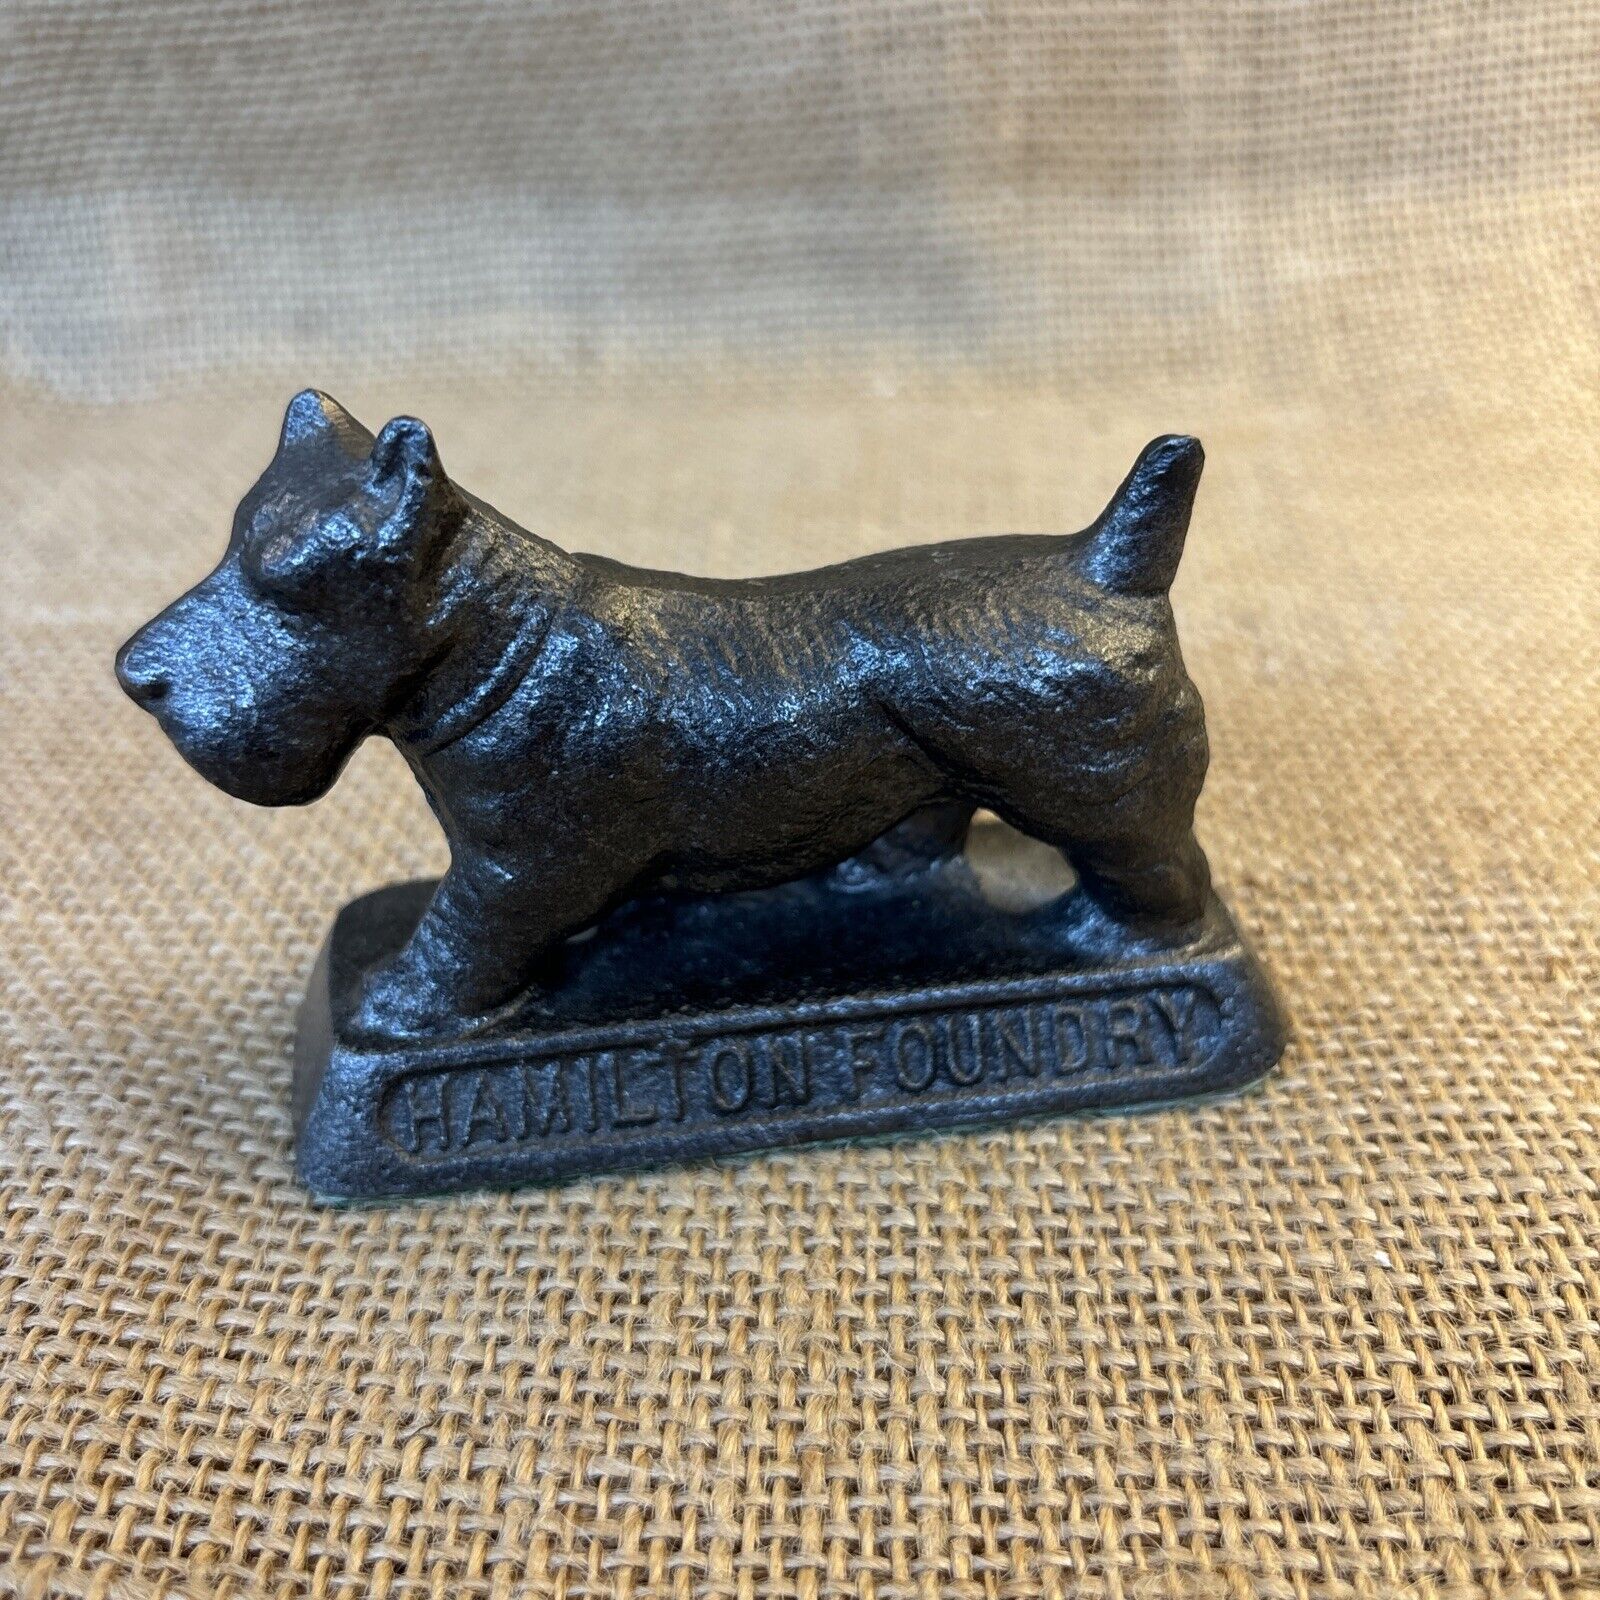 Hamilton Foundry Quality Castings Scottie Dog Paperweight Vintage